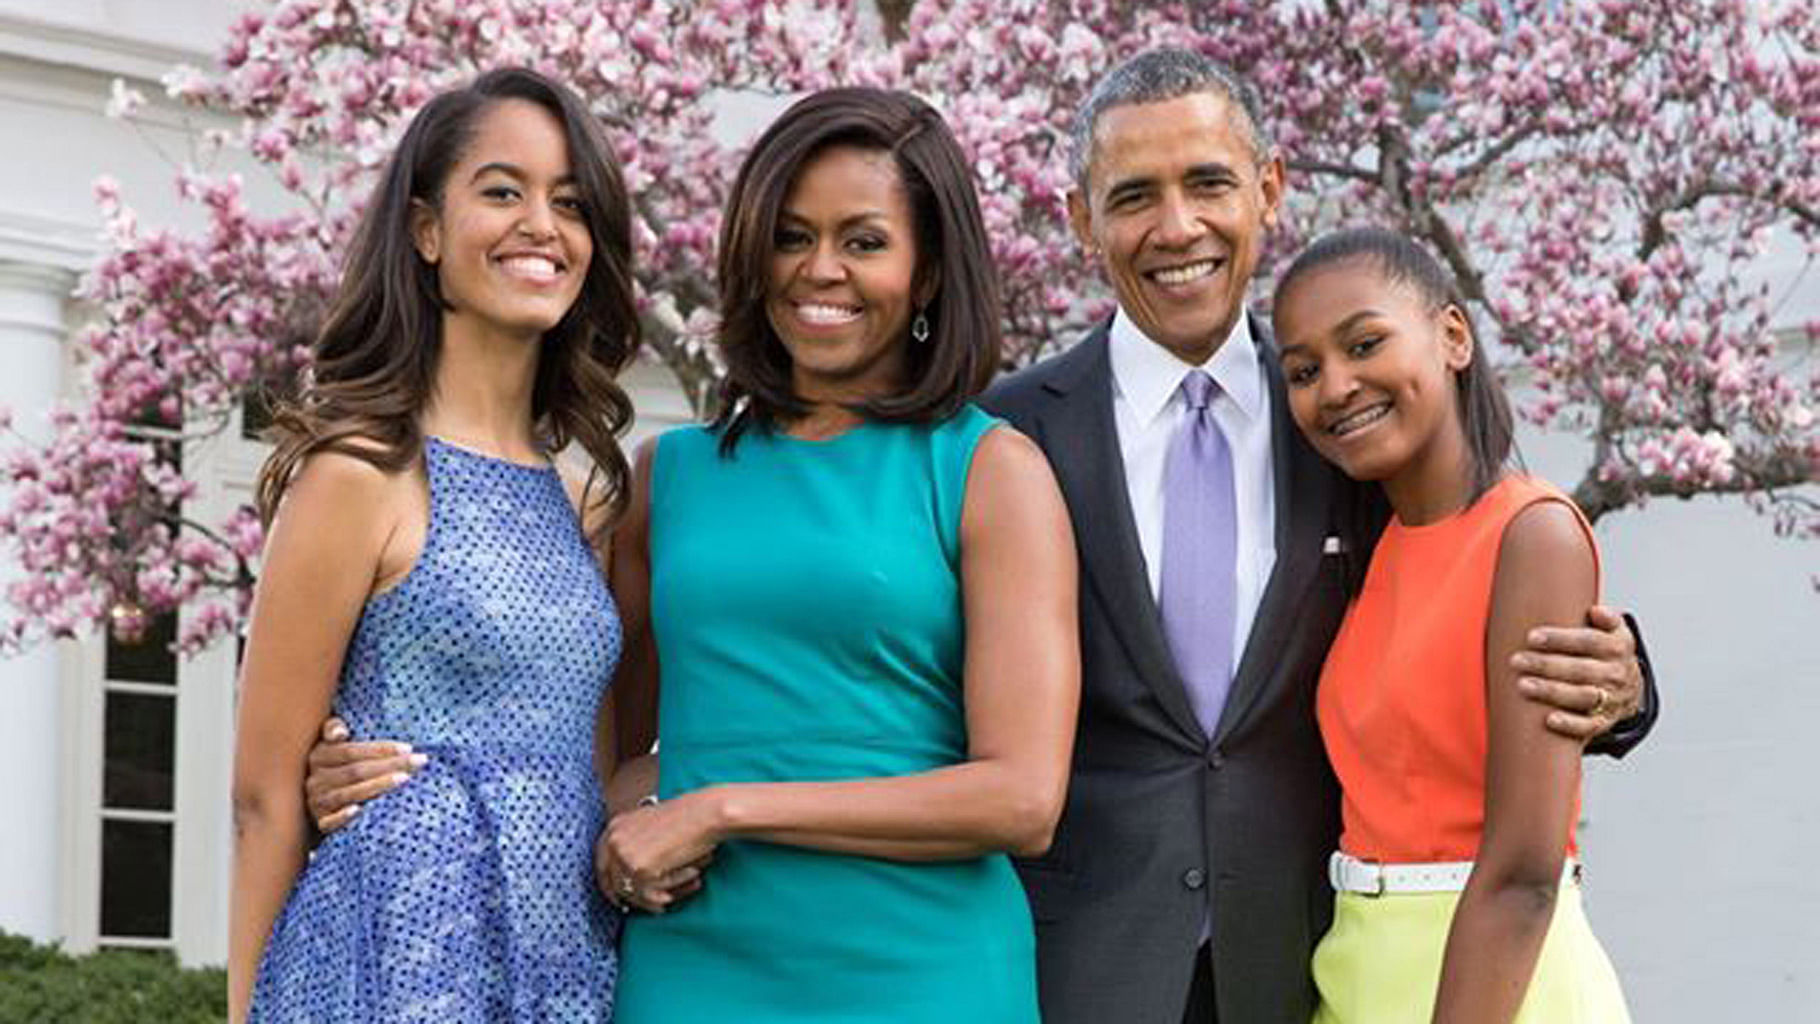 The Obama family. (Photo: The White House <a href="https://www.facebook.com/WhiteHouse/photos/pb.63811549237.-2207520000.1455095182./10154035717259238/?type=3&amp;theater">Facebook</a> Page)